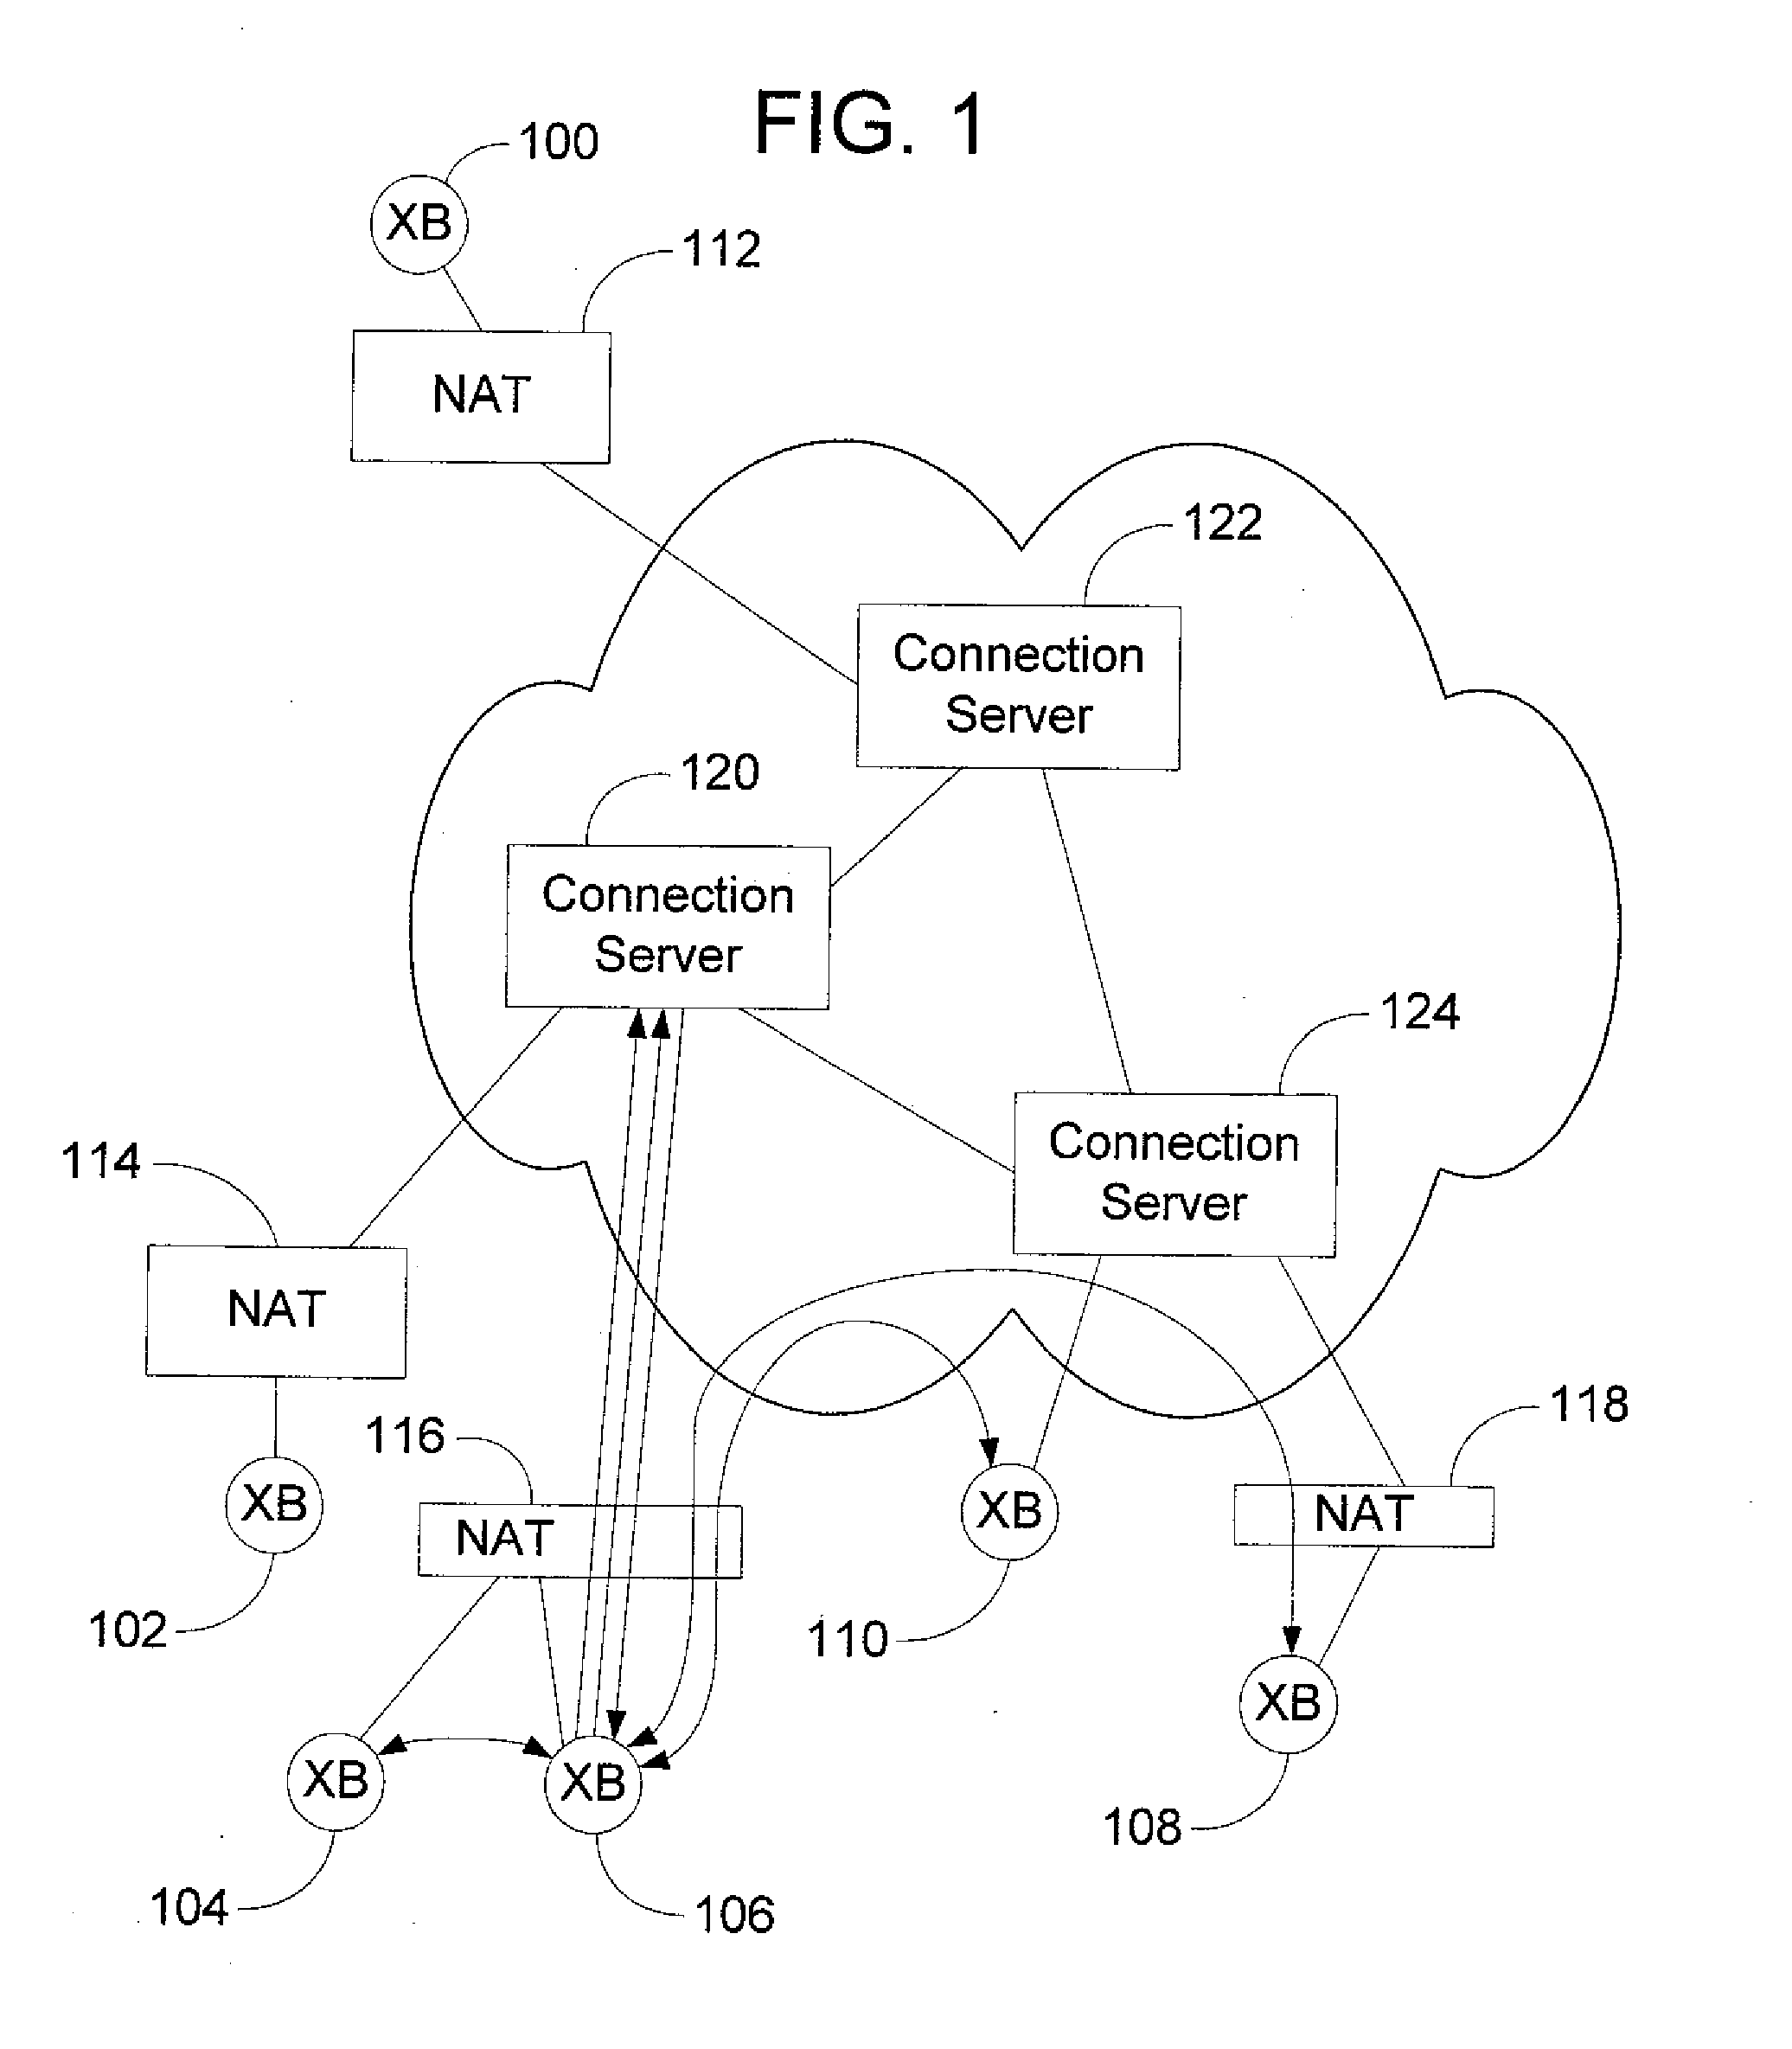 Peer-To-Peer Method of Quality of Service (QoS) Probing and Analysis and Infrastructure Employing Same